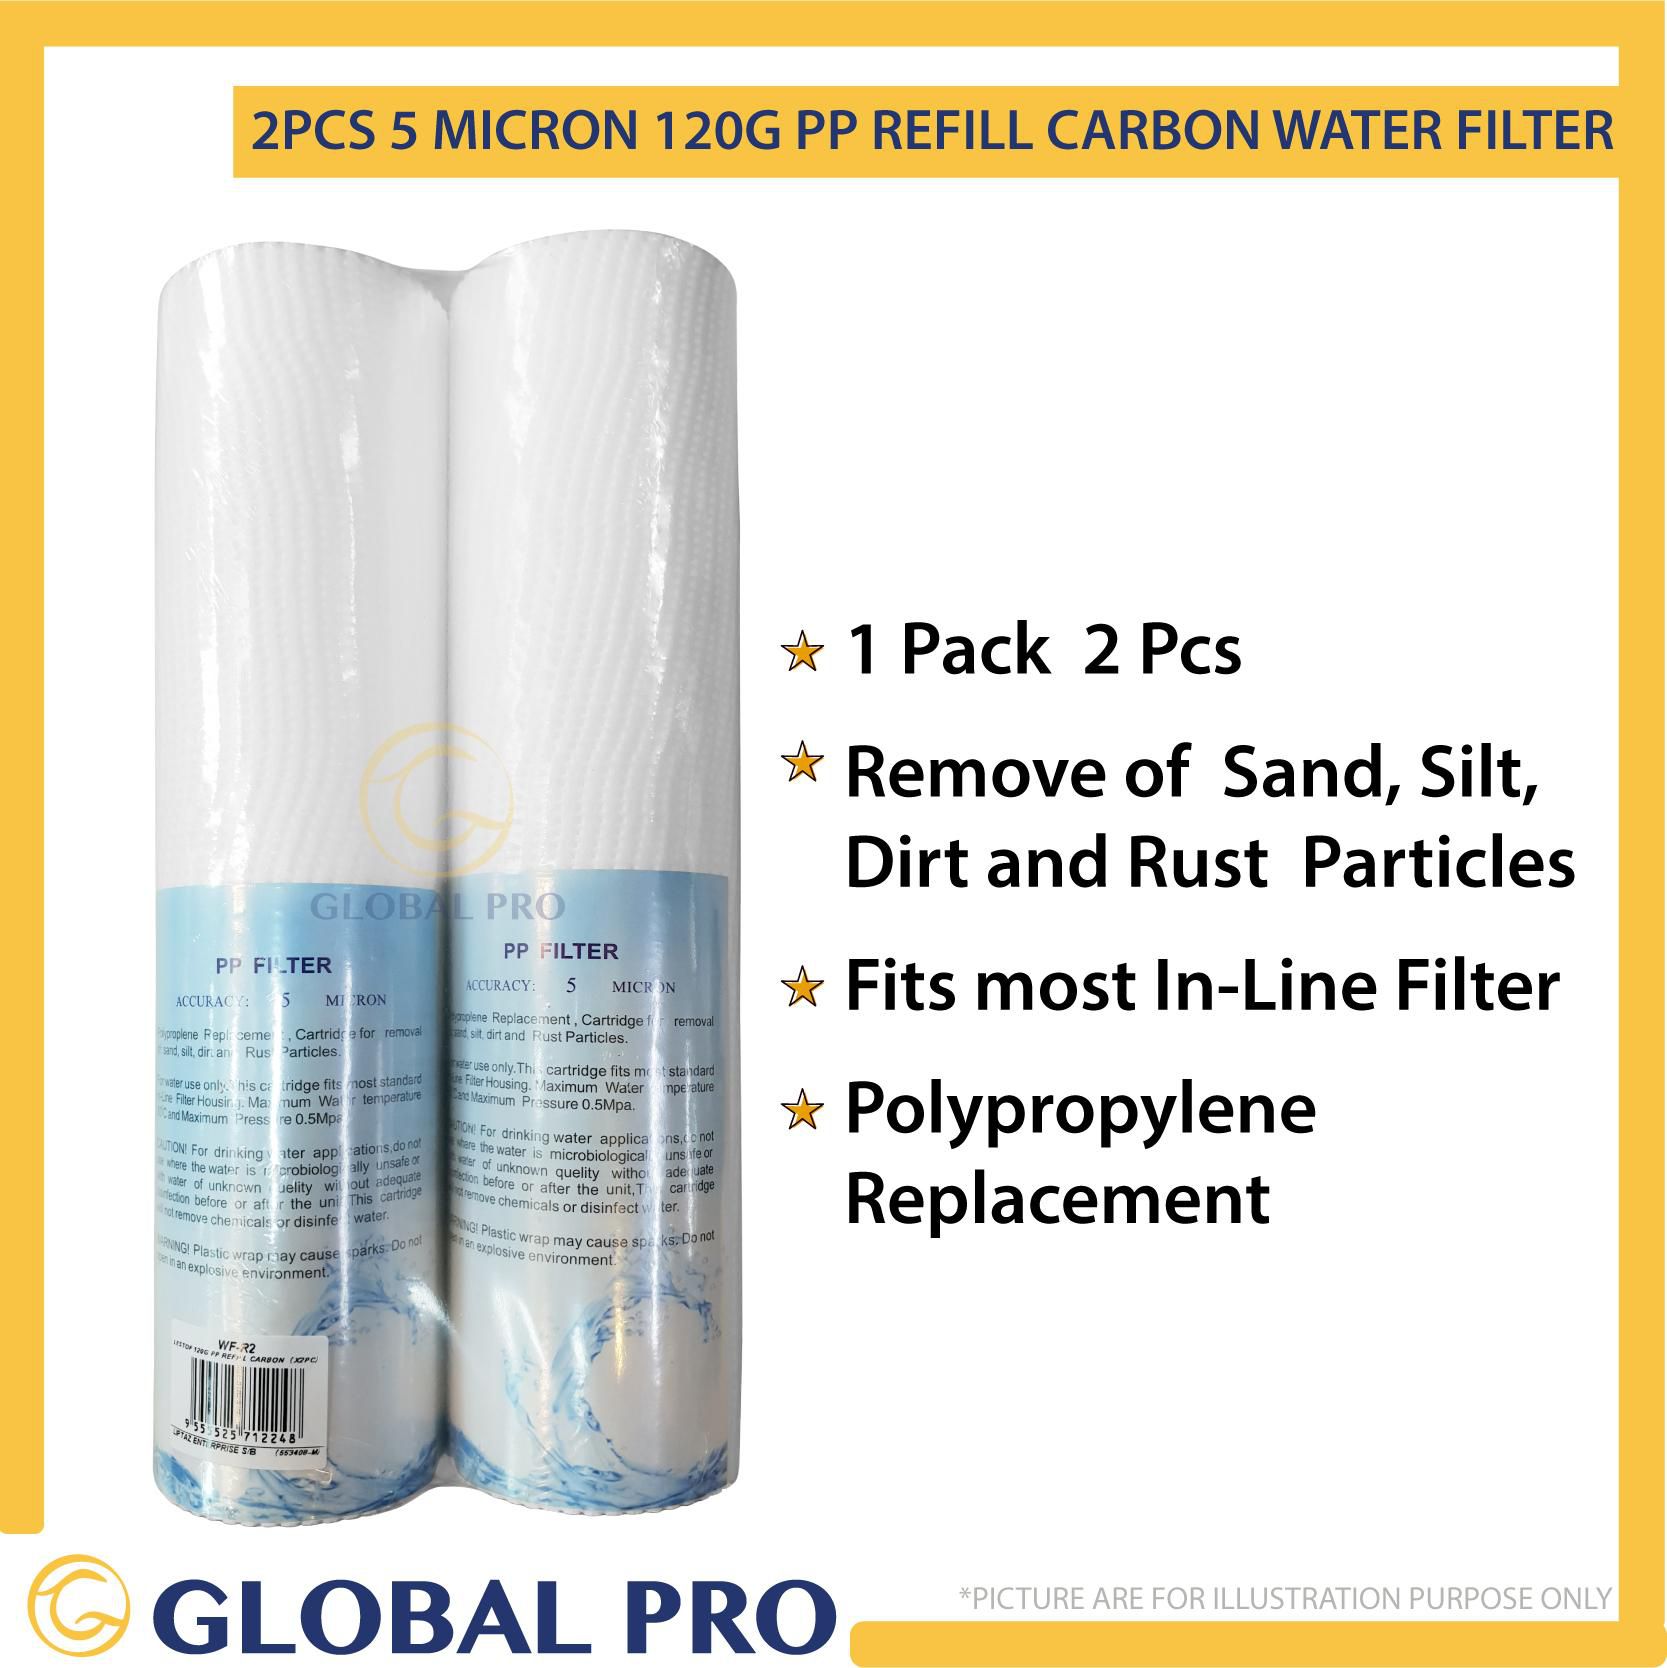 2PCS 5 Micron 120G PP Refill Carbon Water Filter Replacement Cartridge